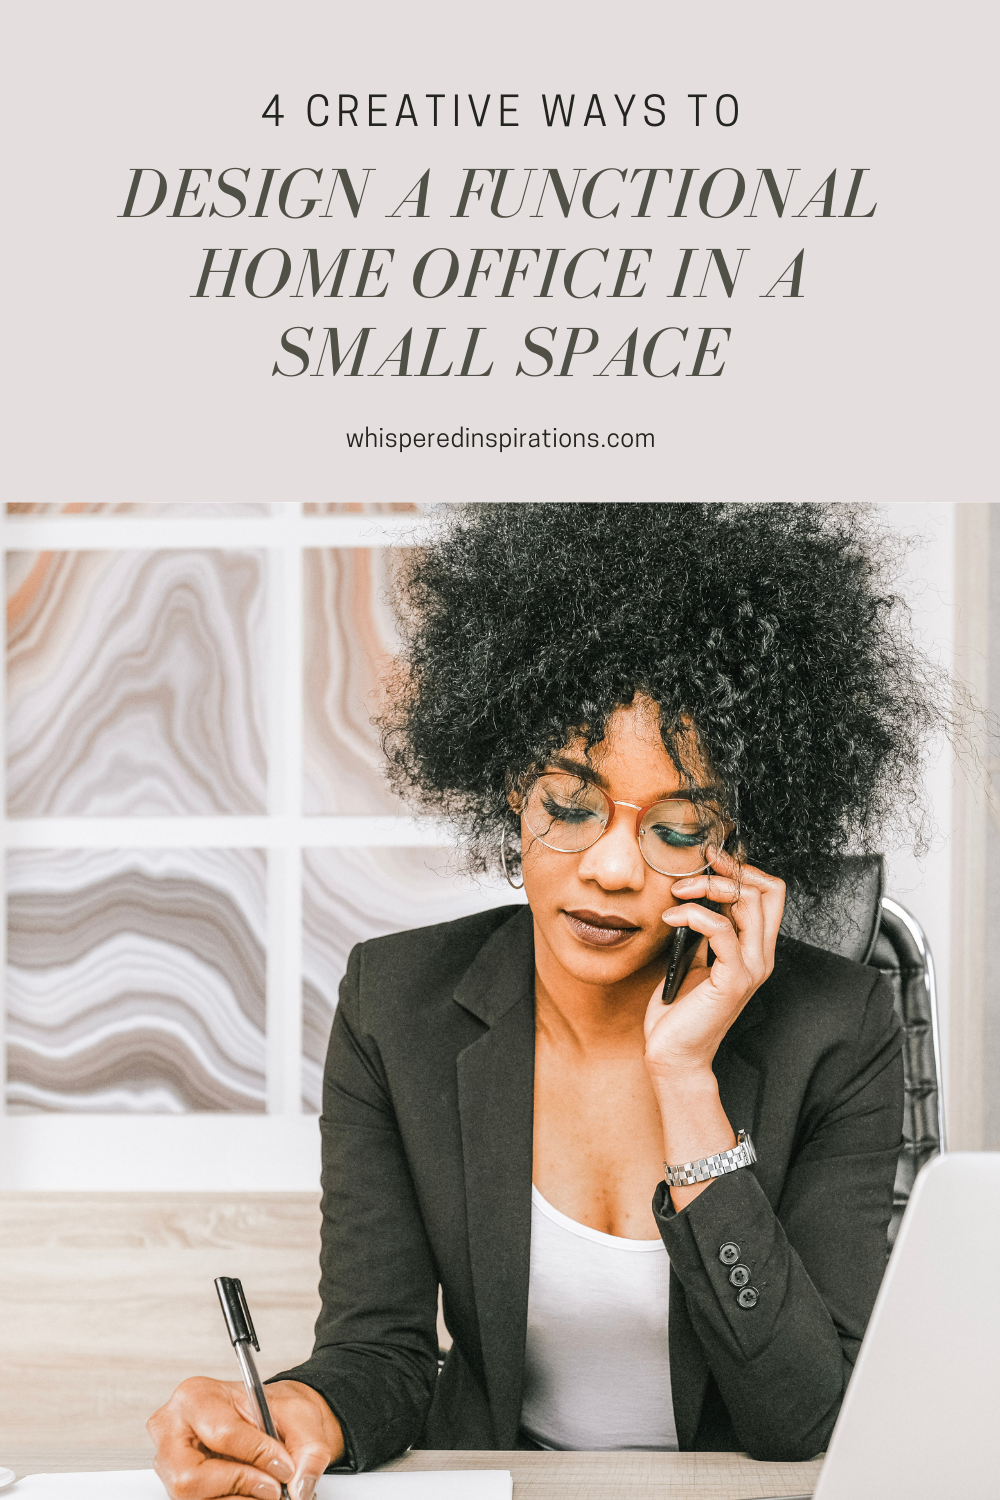 A woman writes down something at her desk on the phone. These are tips that will help design a functional home office in a small space.